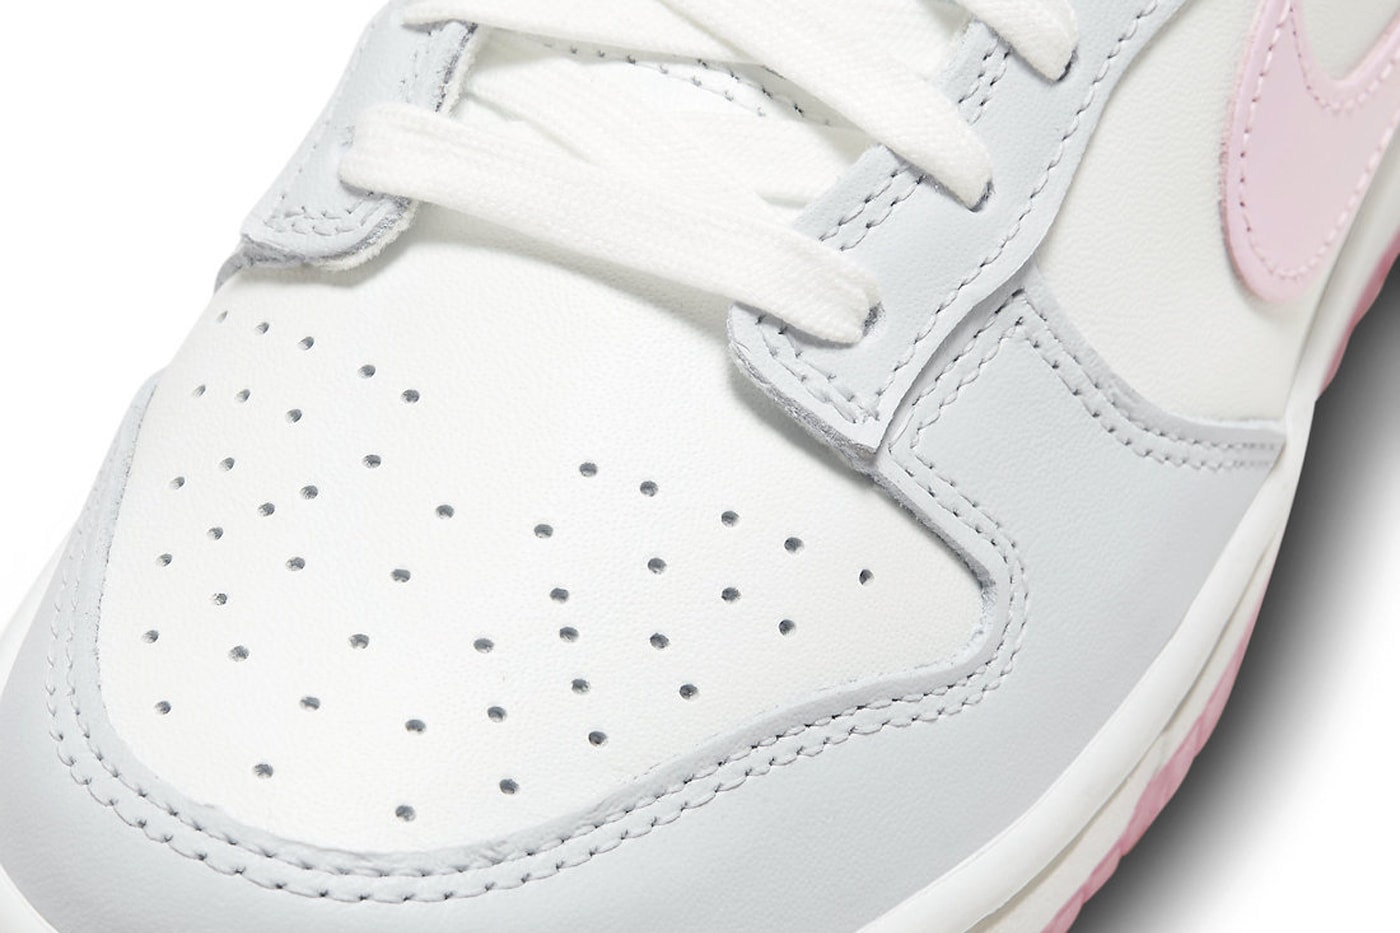 Nike Dunk Low 52 white pink grey FN3451-161 Release Info